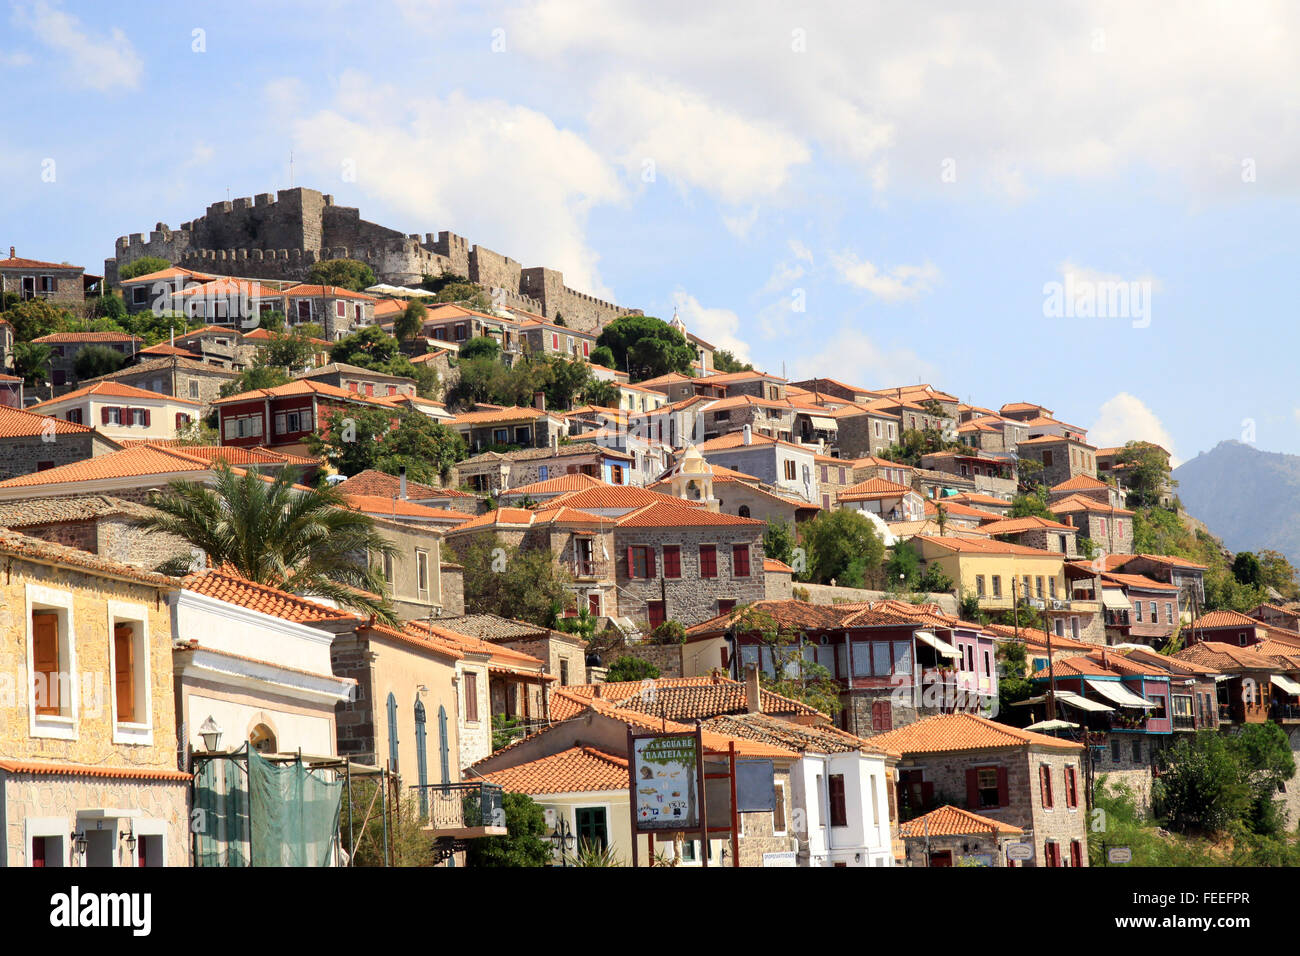 The medieval Greek castle of Mithymna on the hillside above the North Aegean sea resort town of Molyvos on the island of Lesbos Greece Stock Photo